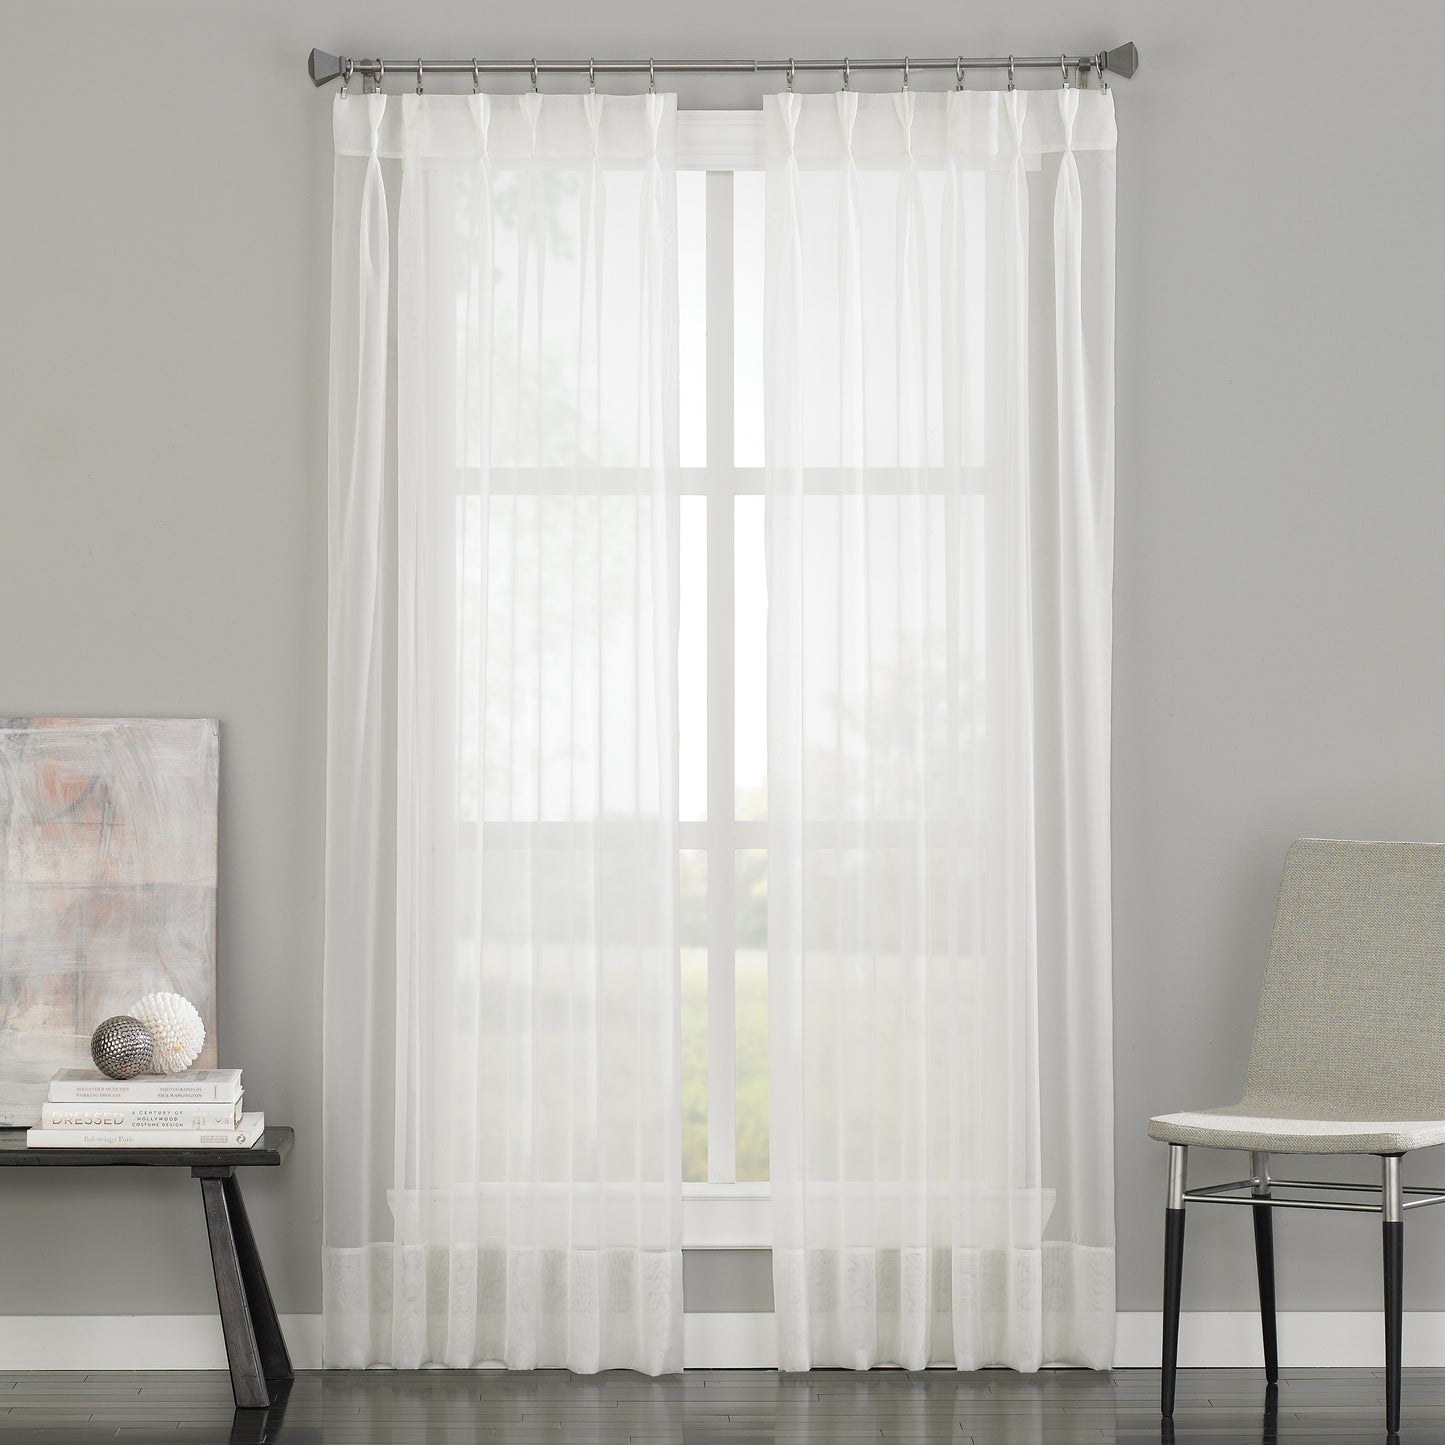 Curtainworks Soho Voile Pinch Pleat Window Curtain Panel Oyster